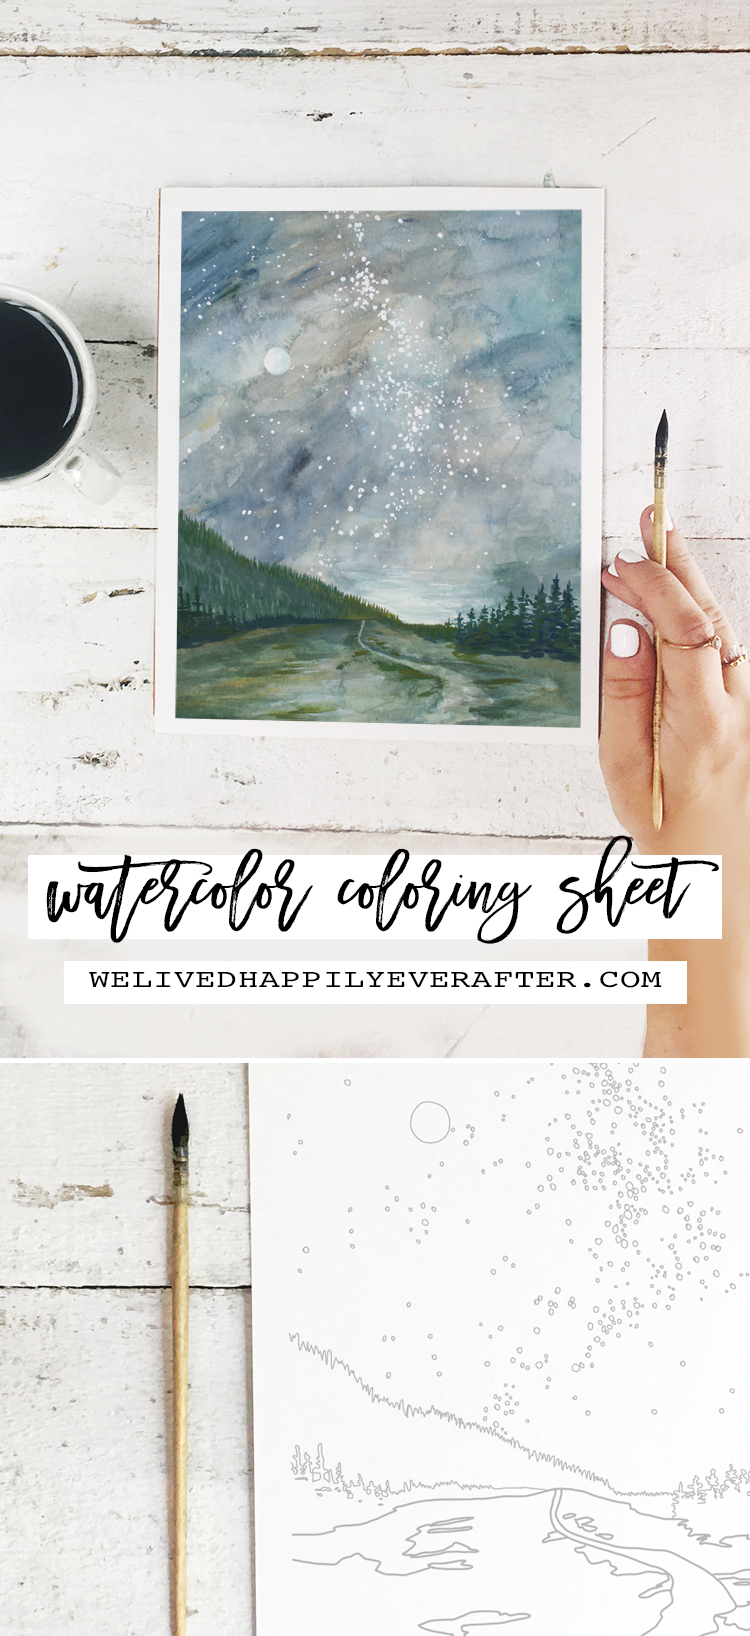 Watercolor Coloring Sheet (For Adults!) Fairytale Forest Painting -Perfect For A DIY Girls Painting Party Night!